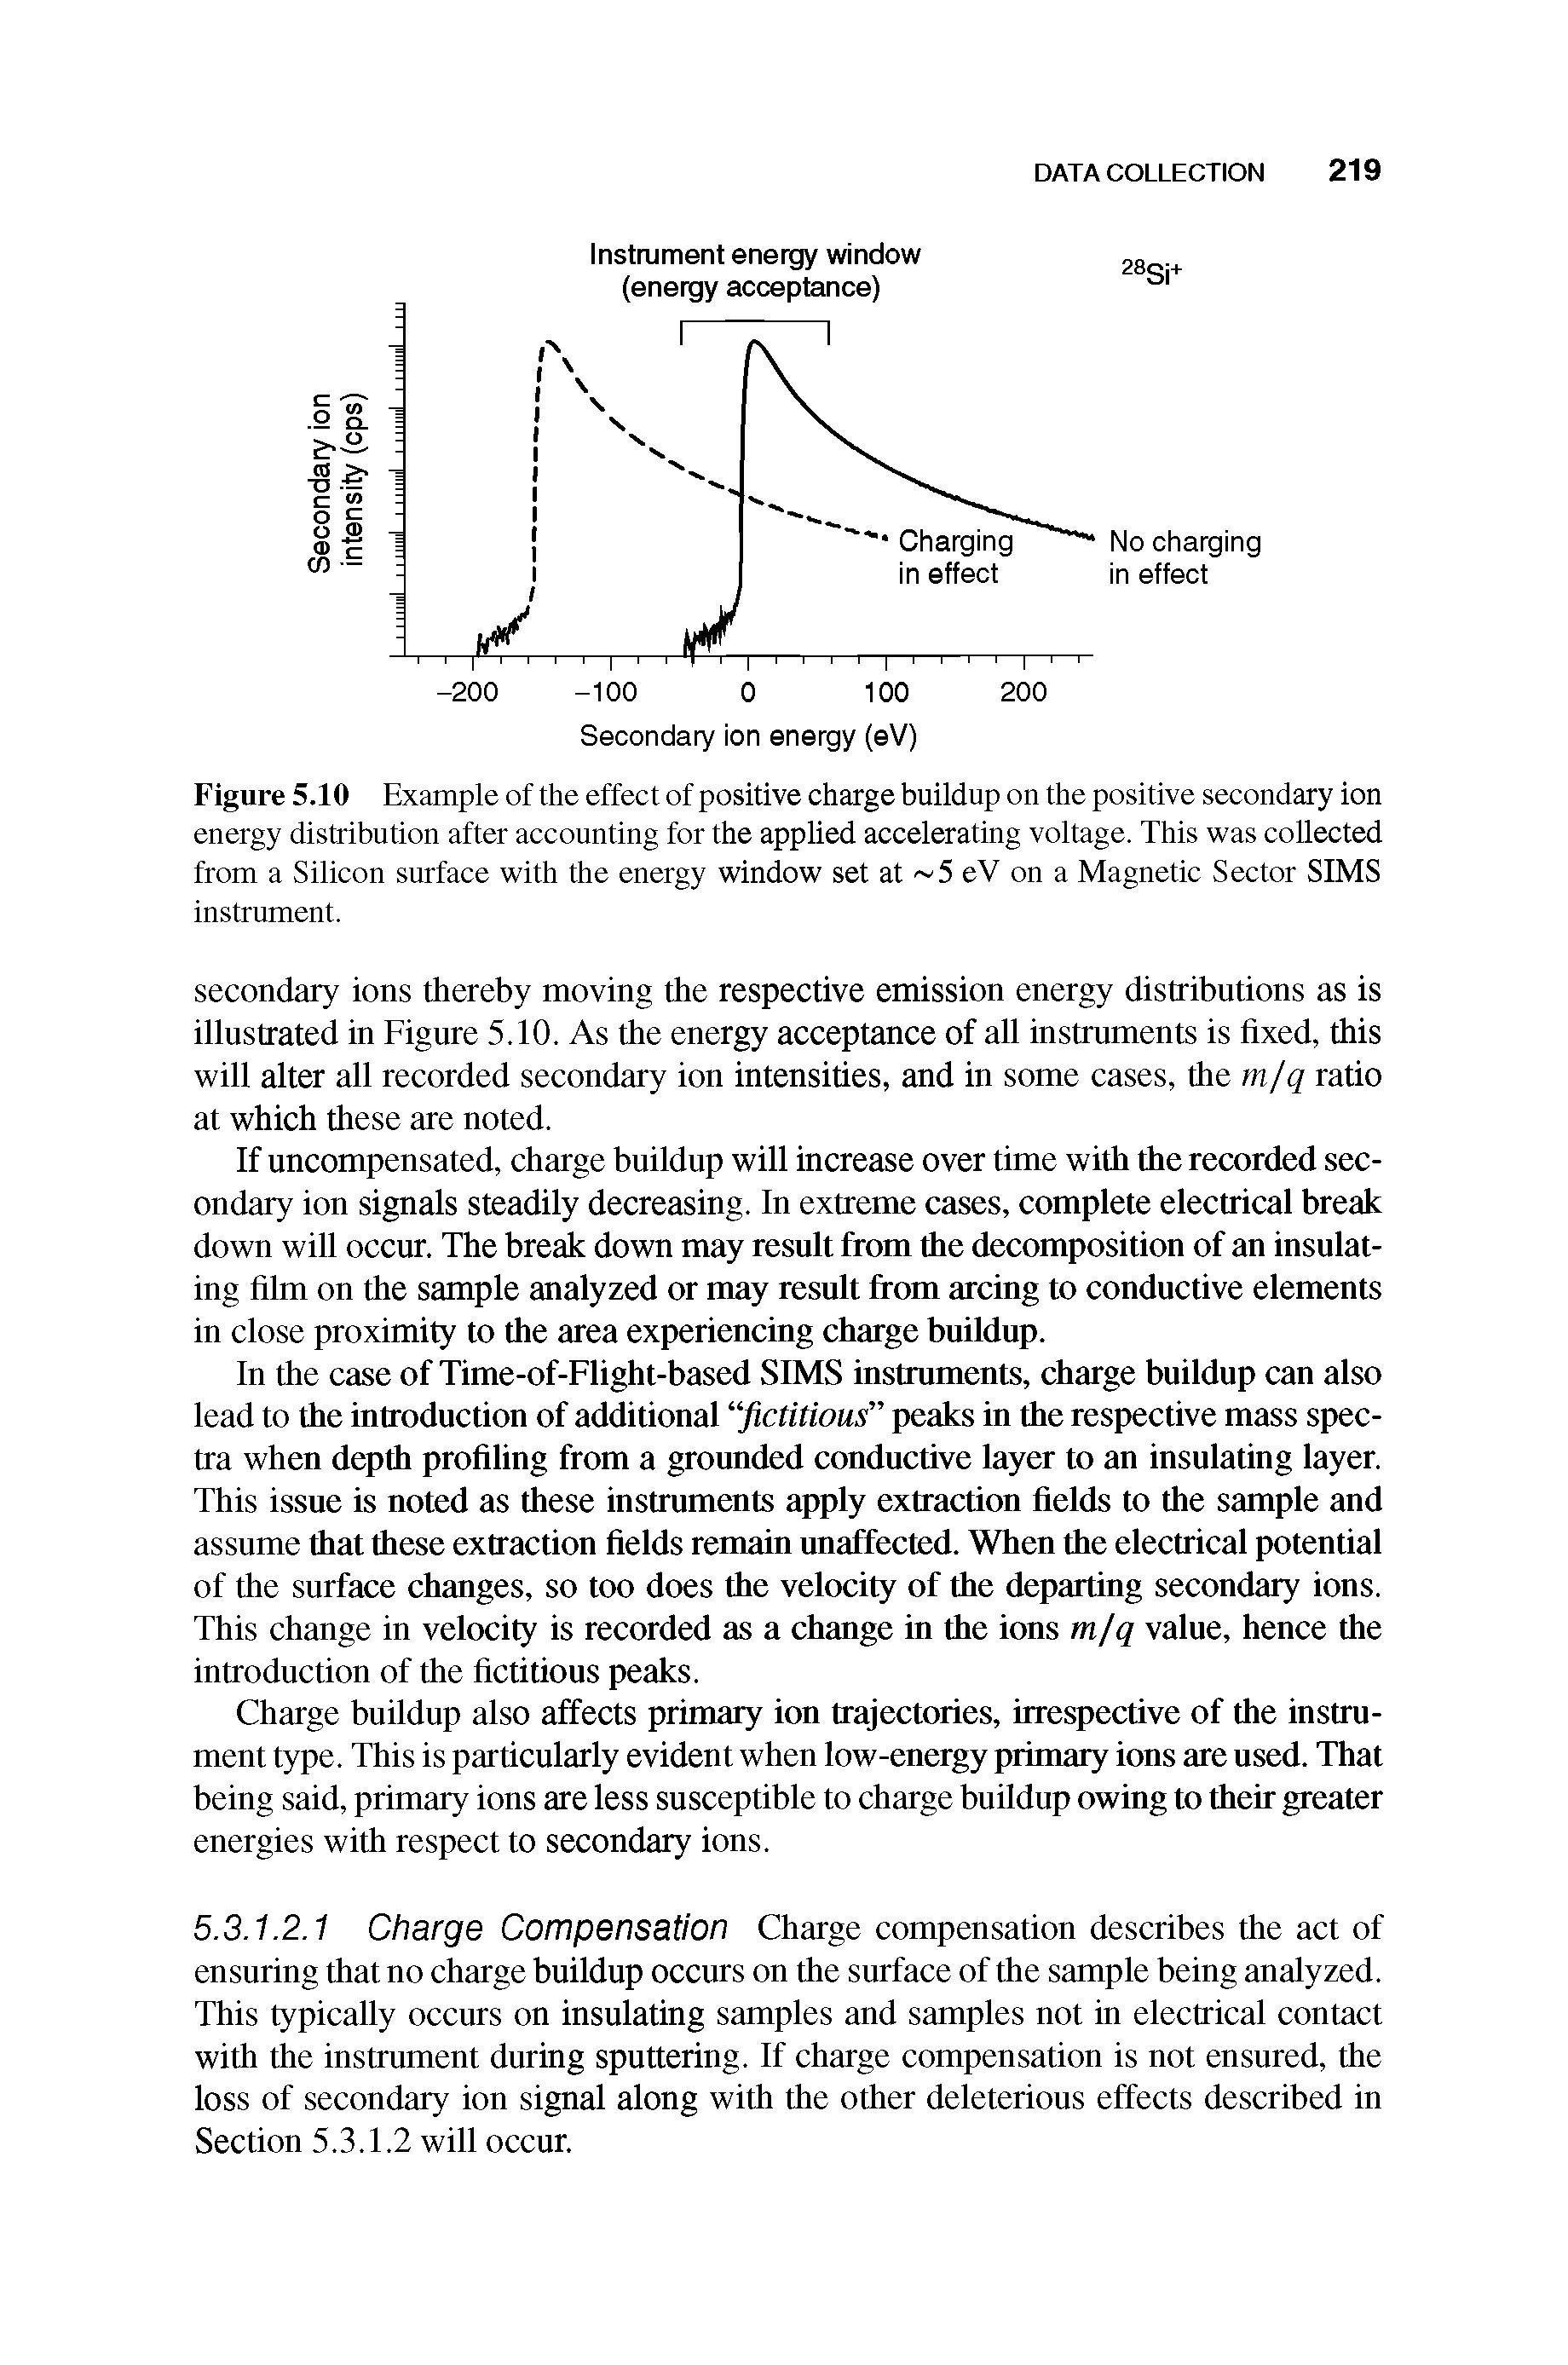 Figure 5.10 Example of the effect of positive charge buildup on the positive secondary ion energy distribution after accounting for the applied accelerating voltage. This was collected from a Silicon surface with the energy window set at 5 eV on a Magnetic Sector SIMS instrument.